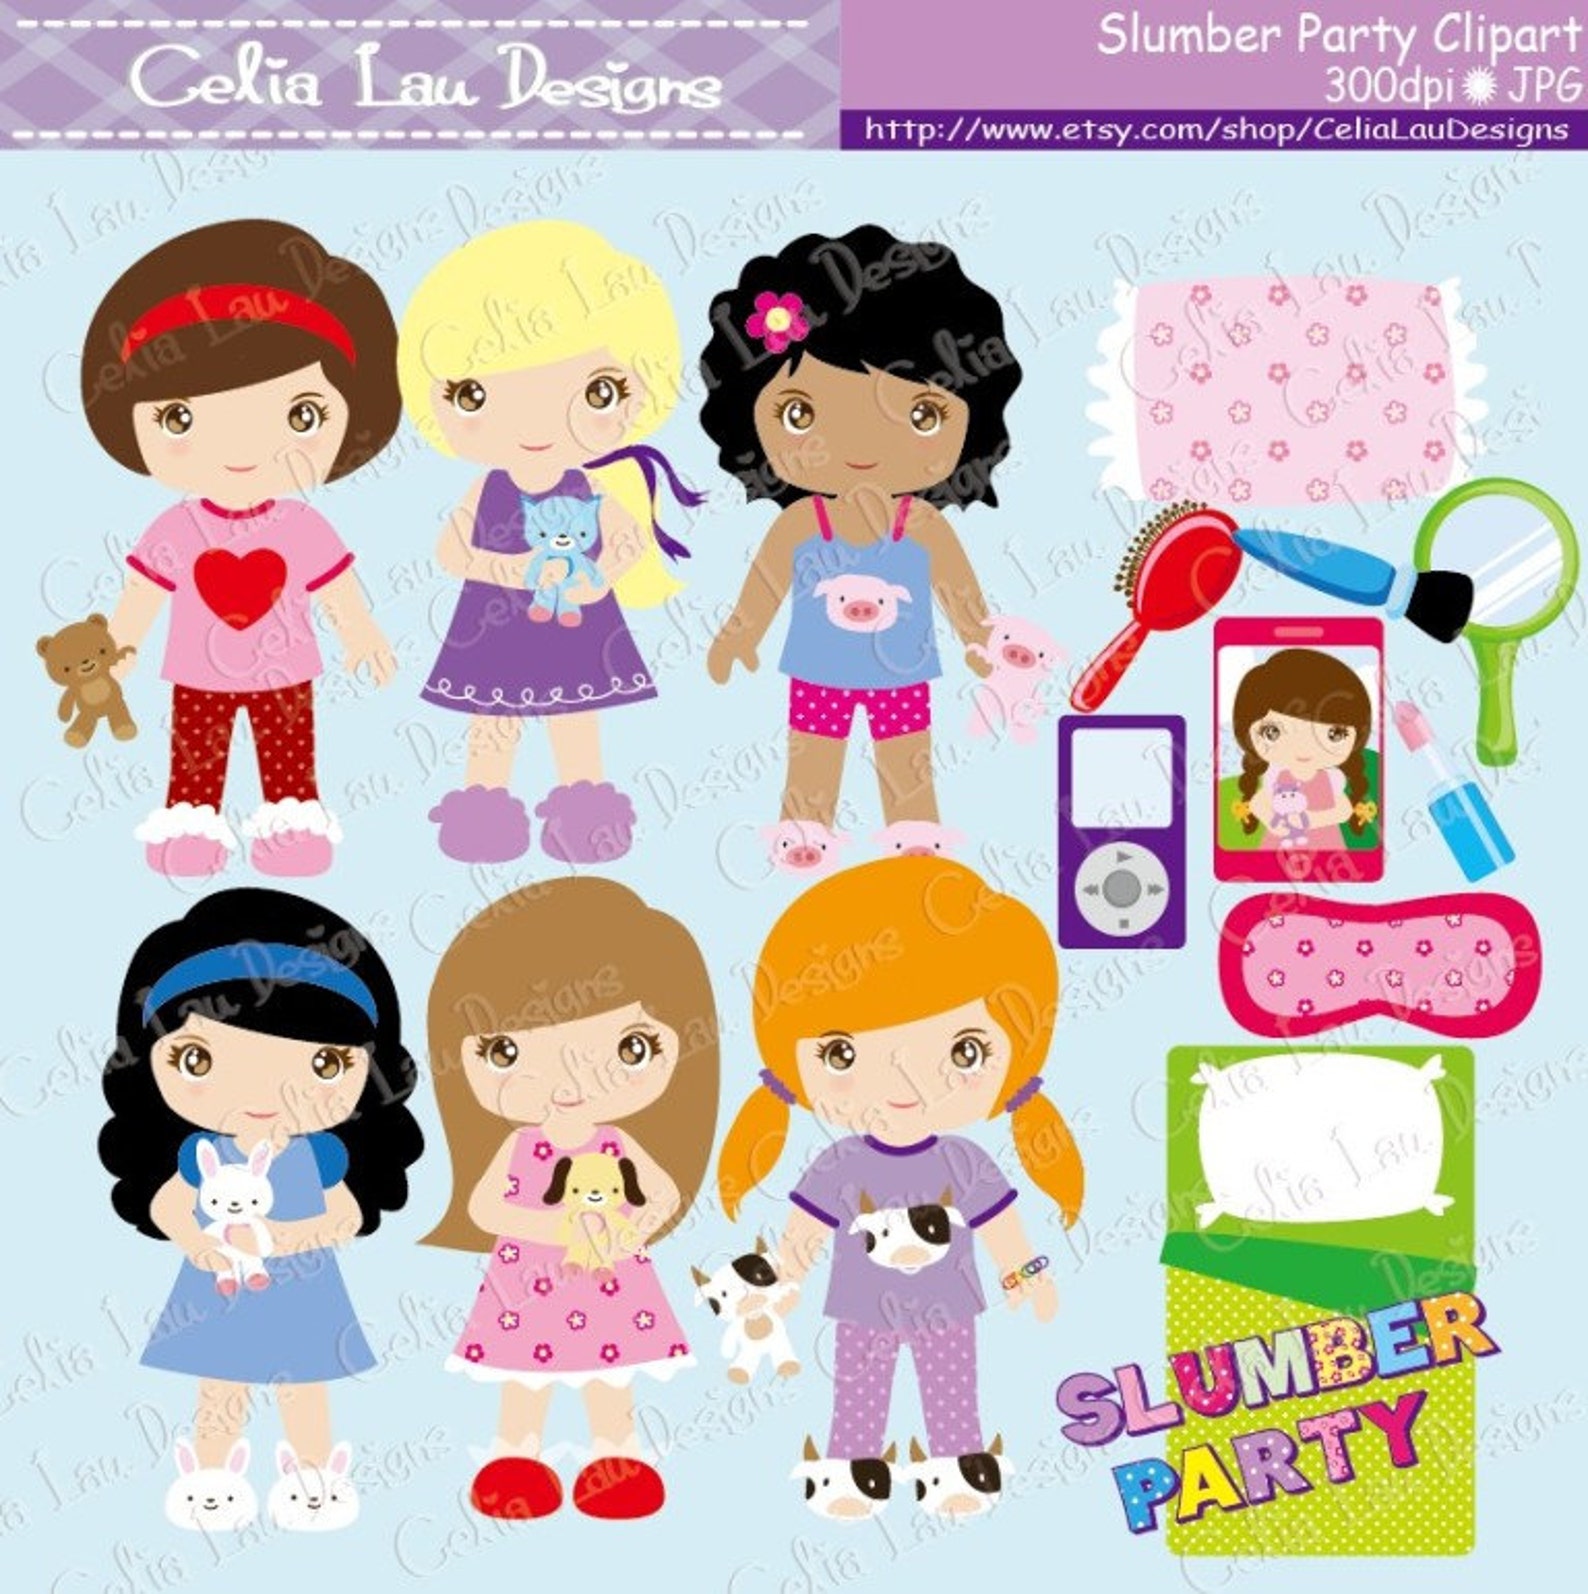 Pajama Party Clipart Slumber Party Clipart Cute Girl Night - Etsy